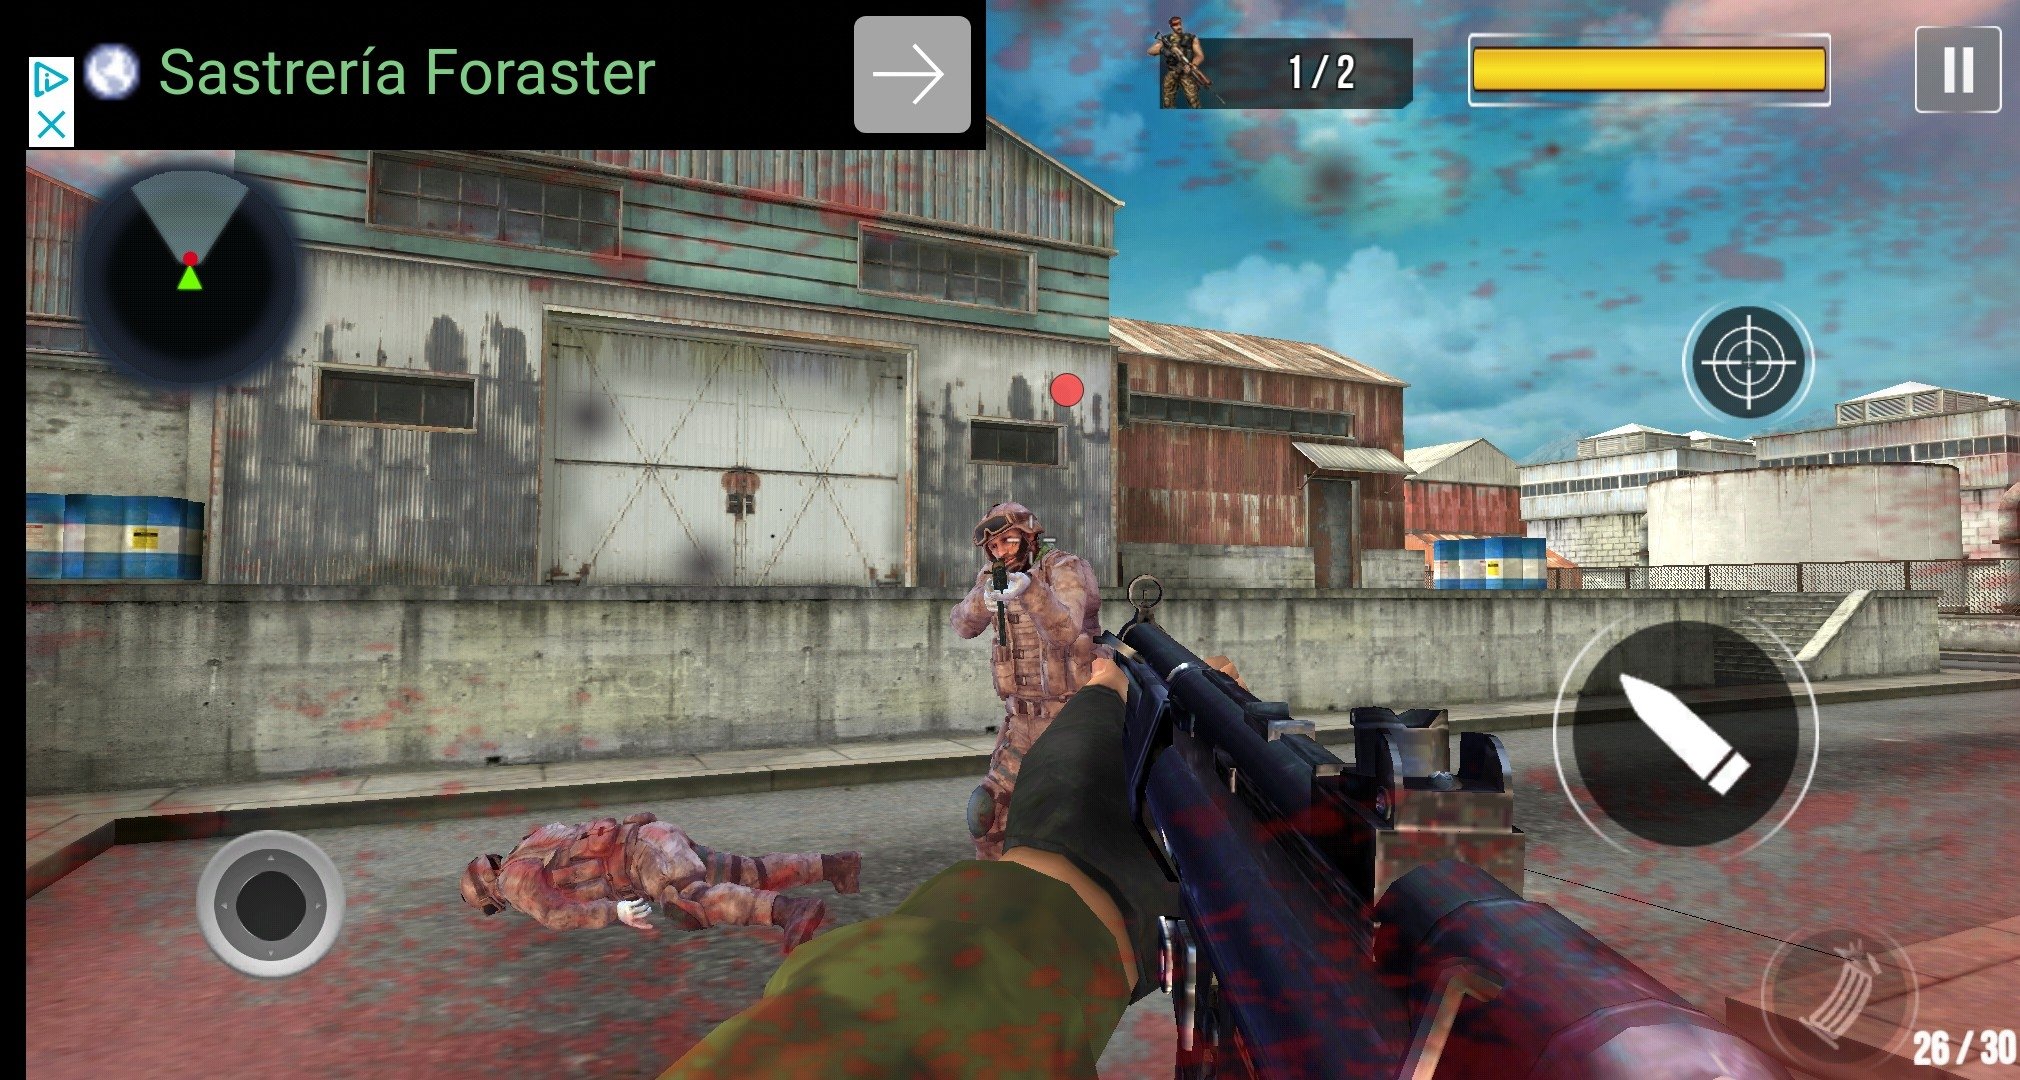 Fps Encounter Shooting 2020 1 59 Download For Android Apk Free